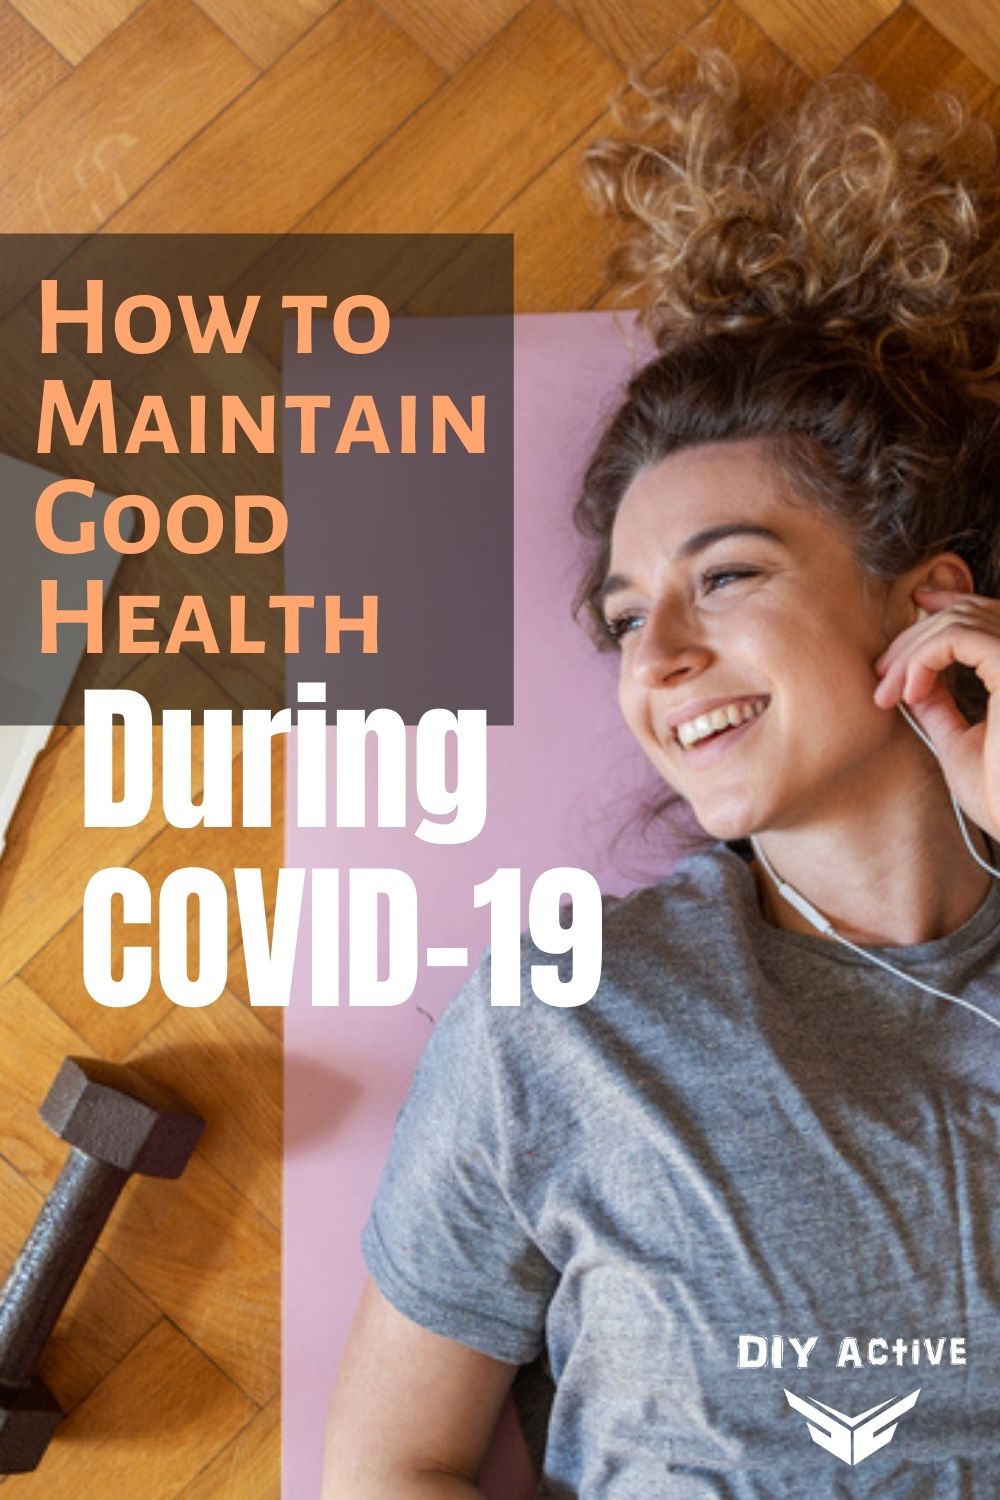 How to Maintain Good Health and Wellbeing During COVID-19